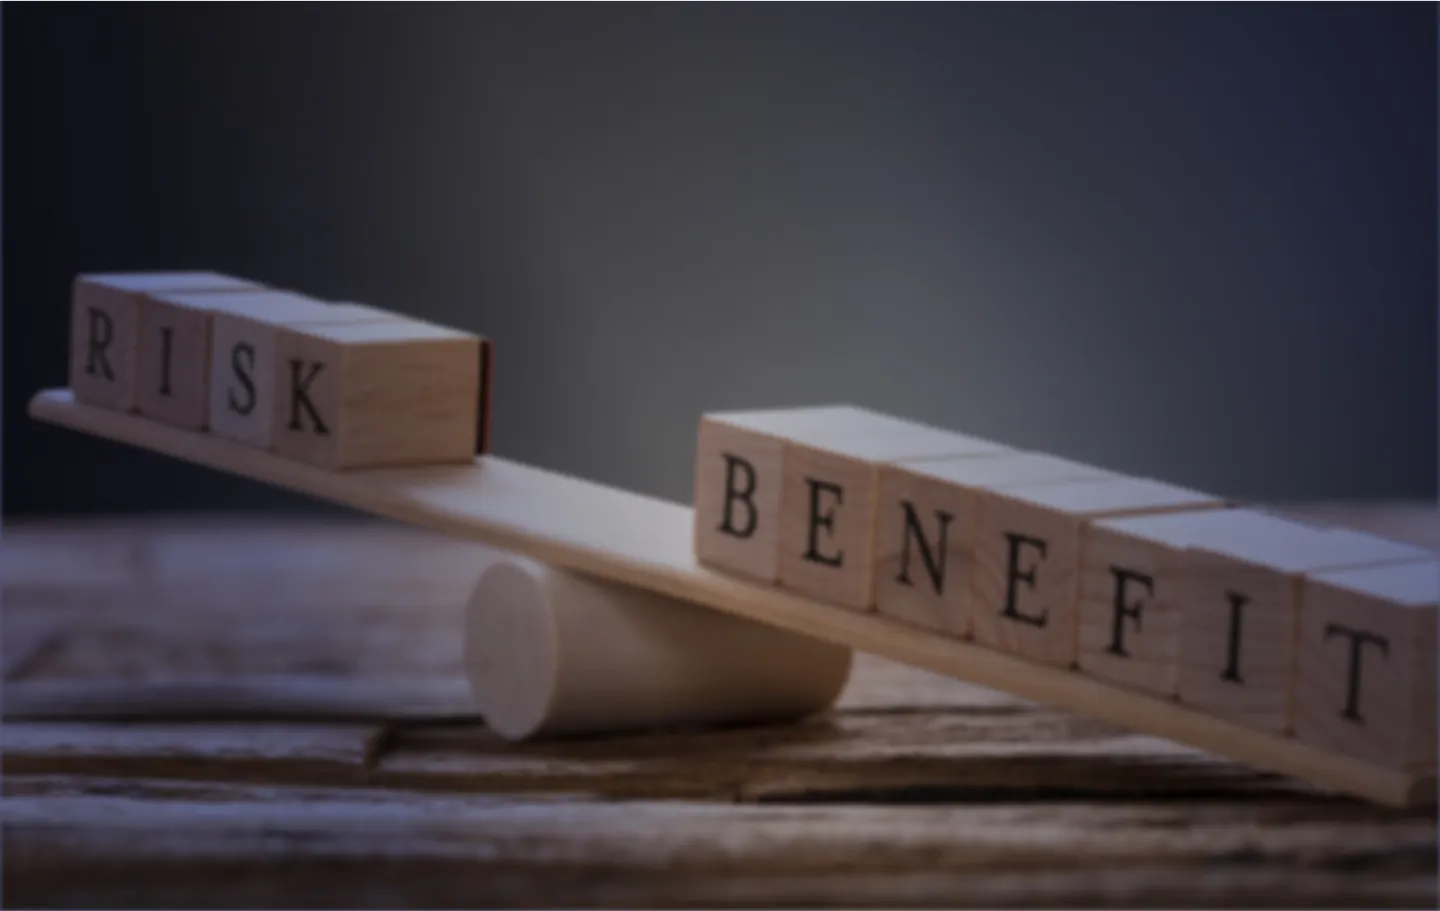 Risk and Benefit written on wooden squares next to each other